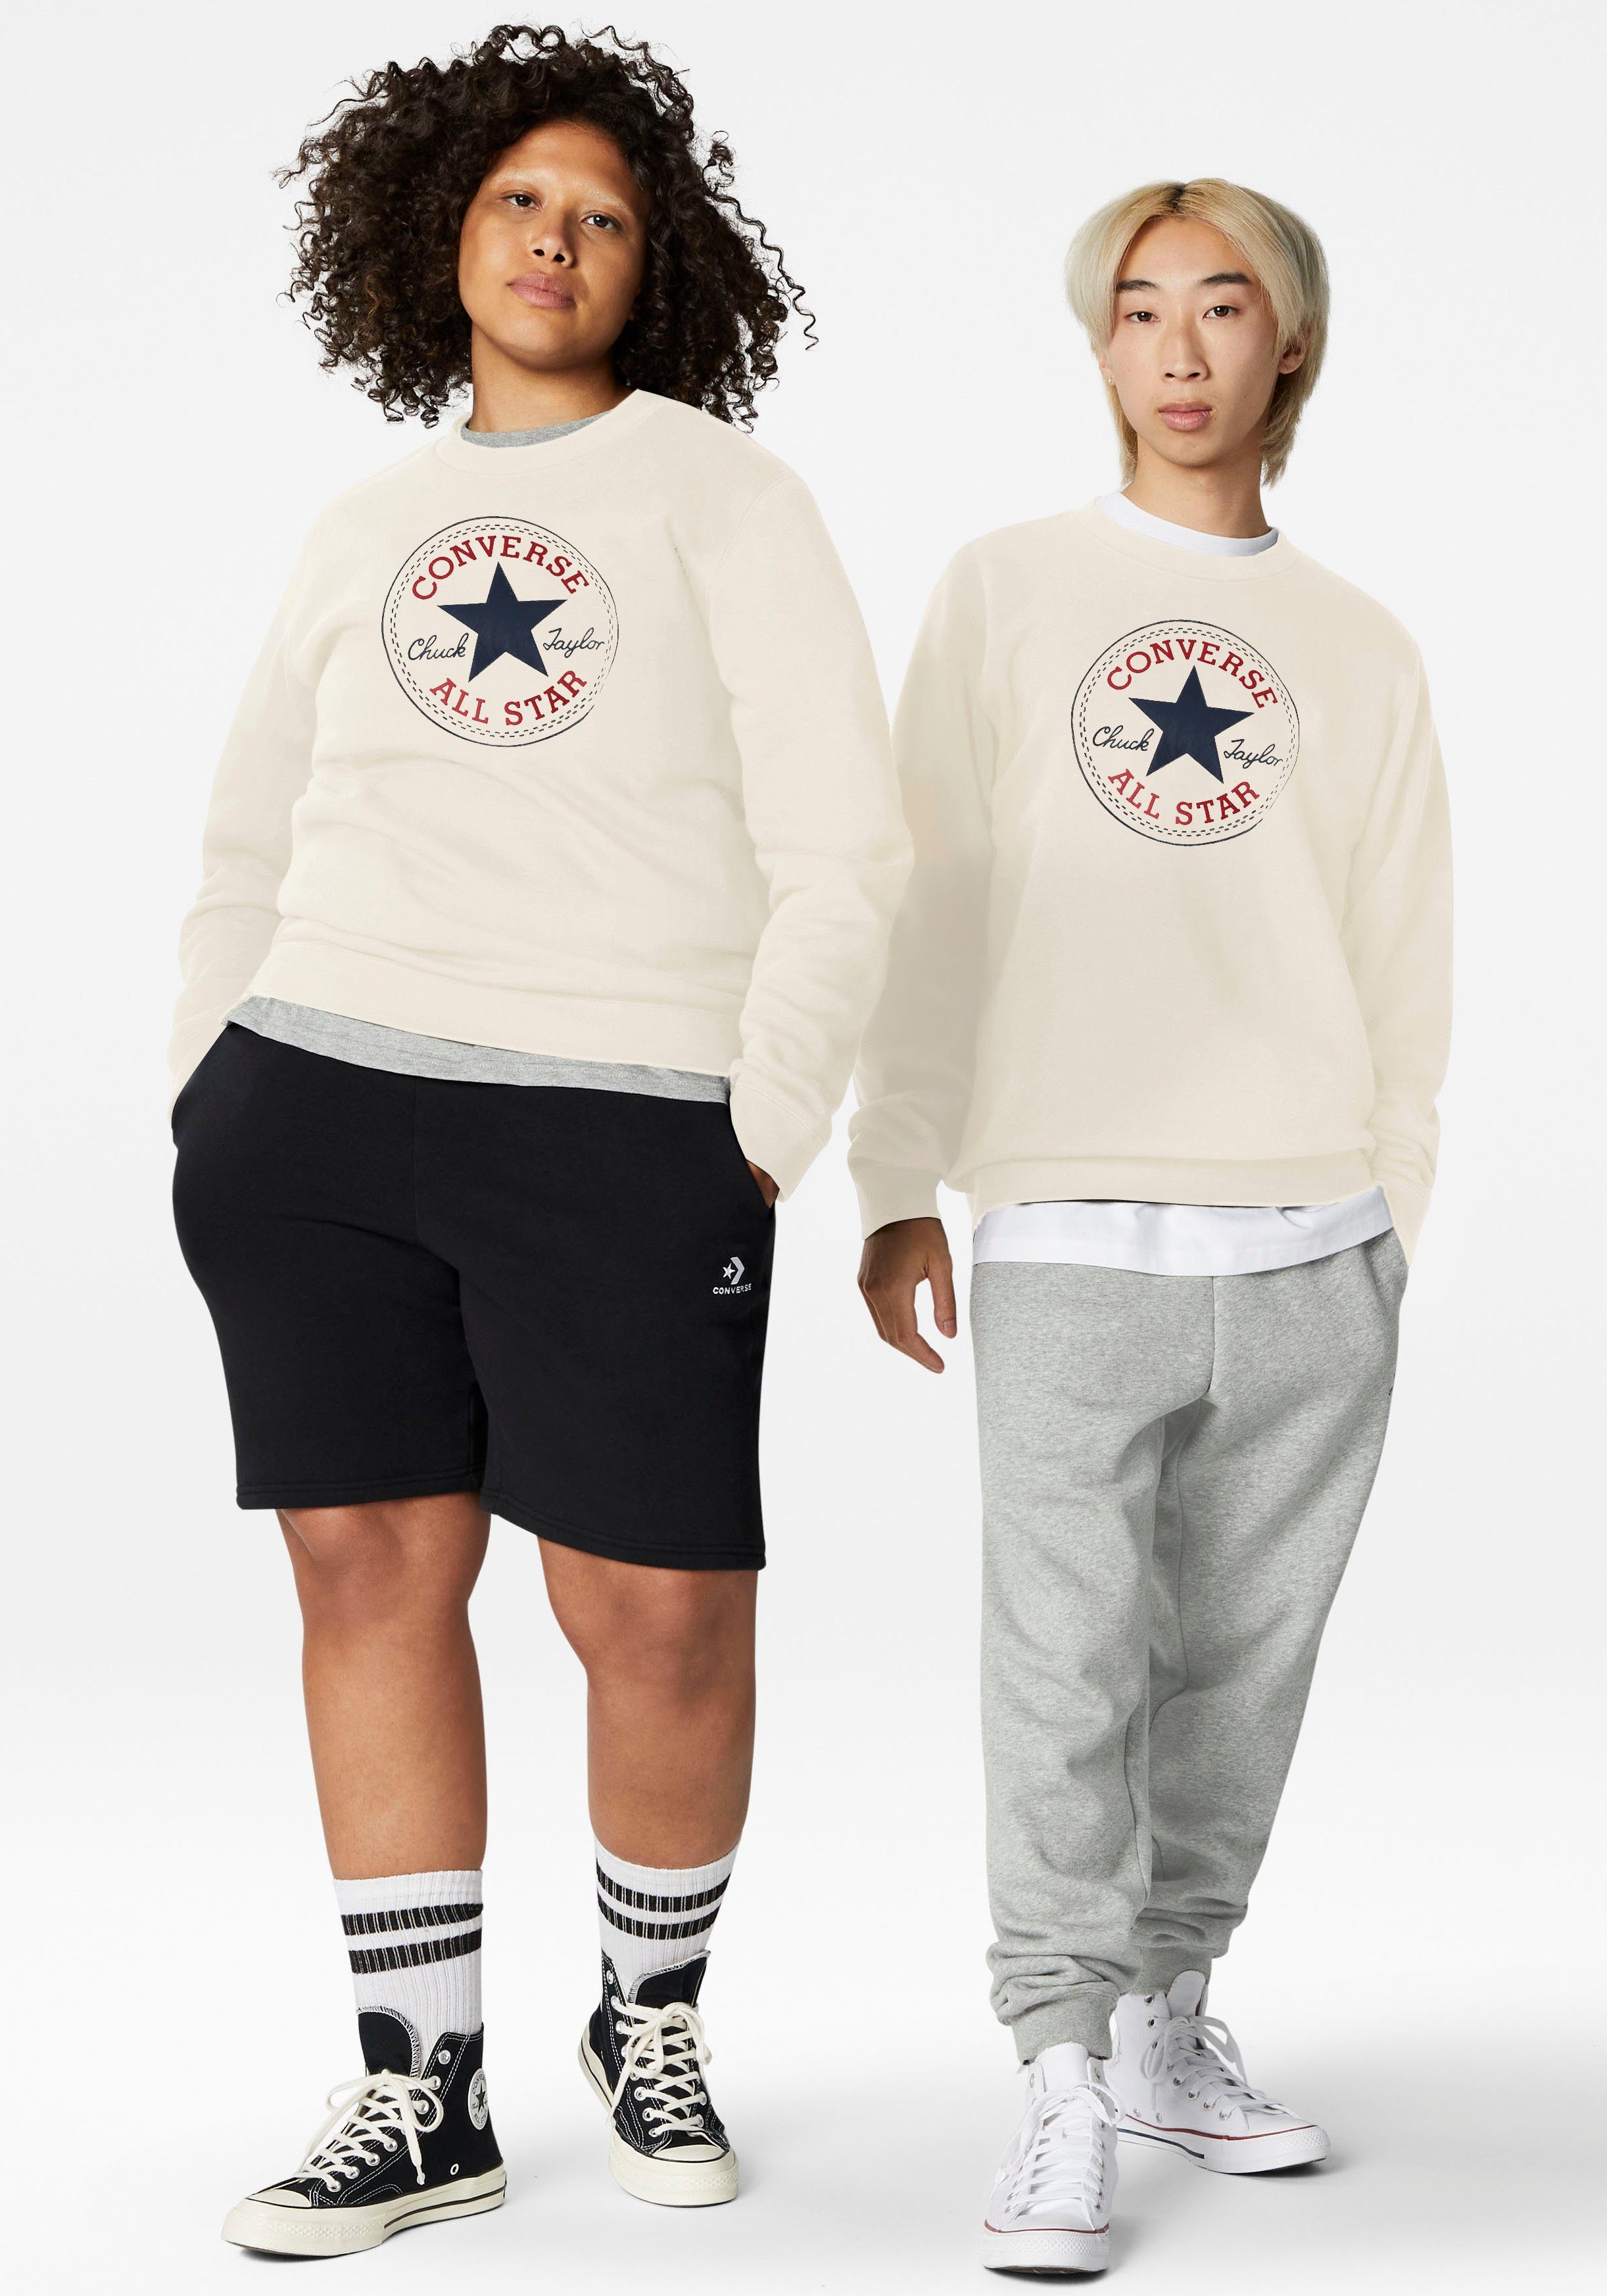 EGR Converse STAR BRUSHED ALL Sweatshirt UNISEX PATCH BACK